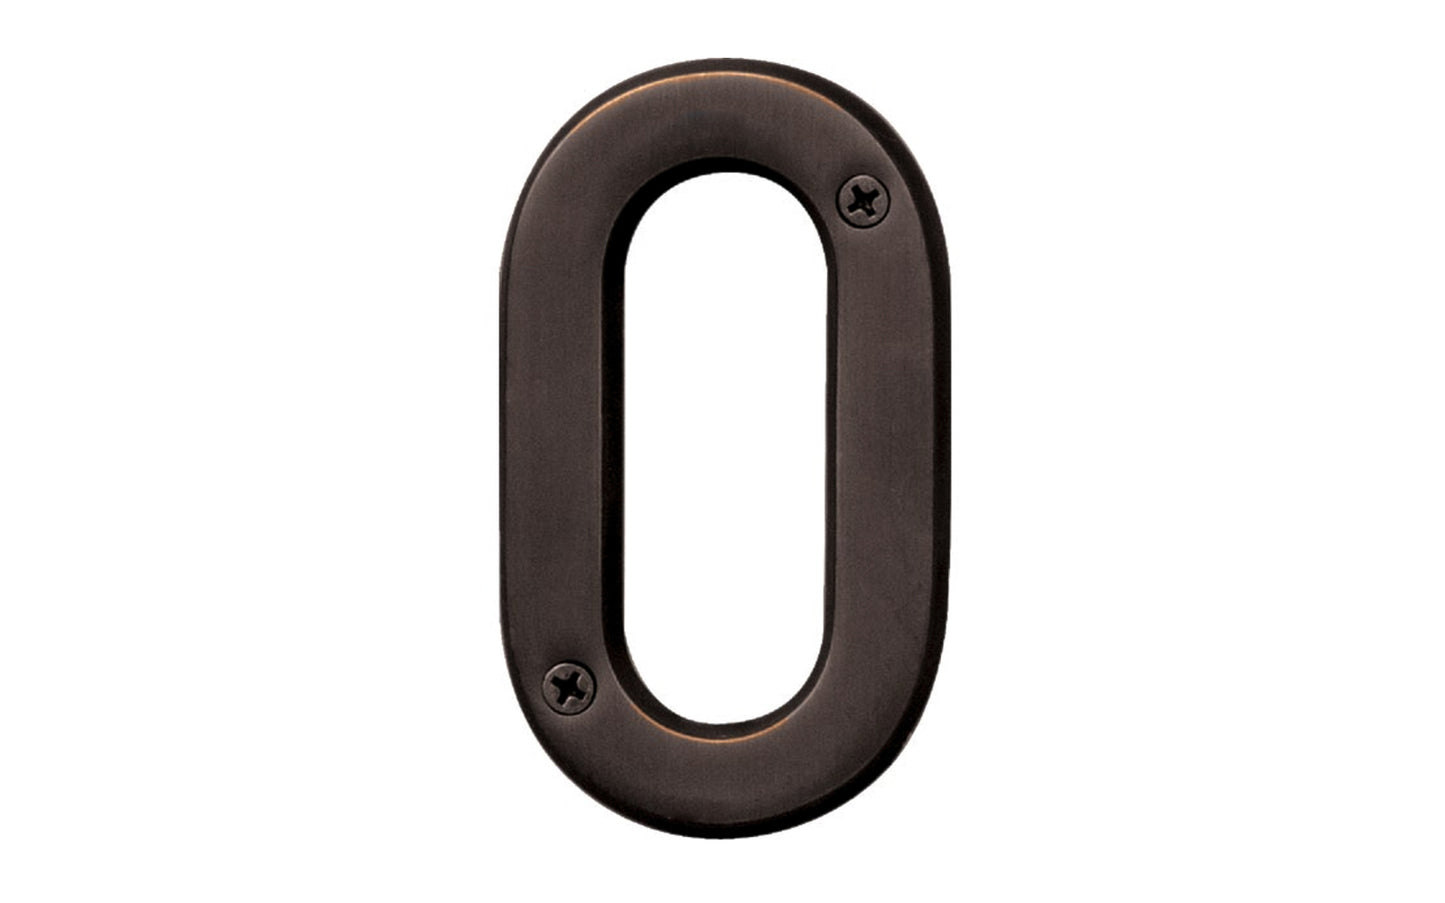 #0 Zero House Number ~ 4" size ~ Made of solid brass material with an oil rubbed bronze finish. Hy-Ko Model BR-420WB/0. Number "0" house number. Old World Bronze finish. Hardware house numbers for outdoors. Includes screws. 029069309404. 